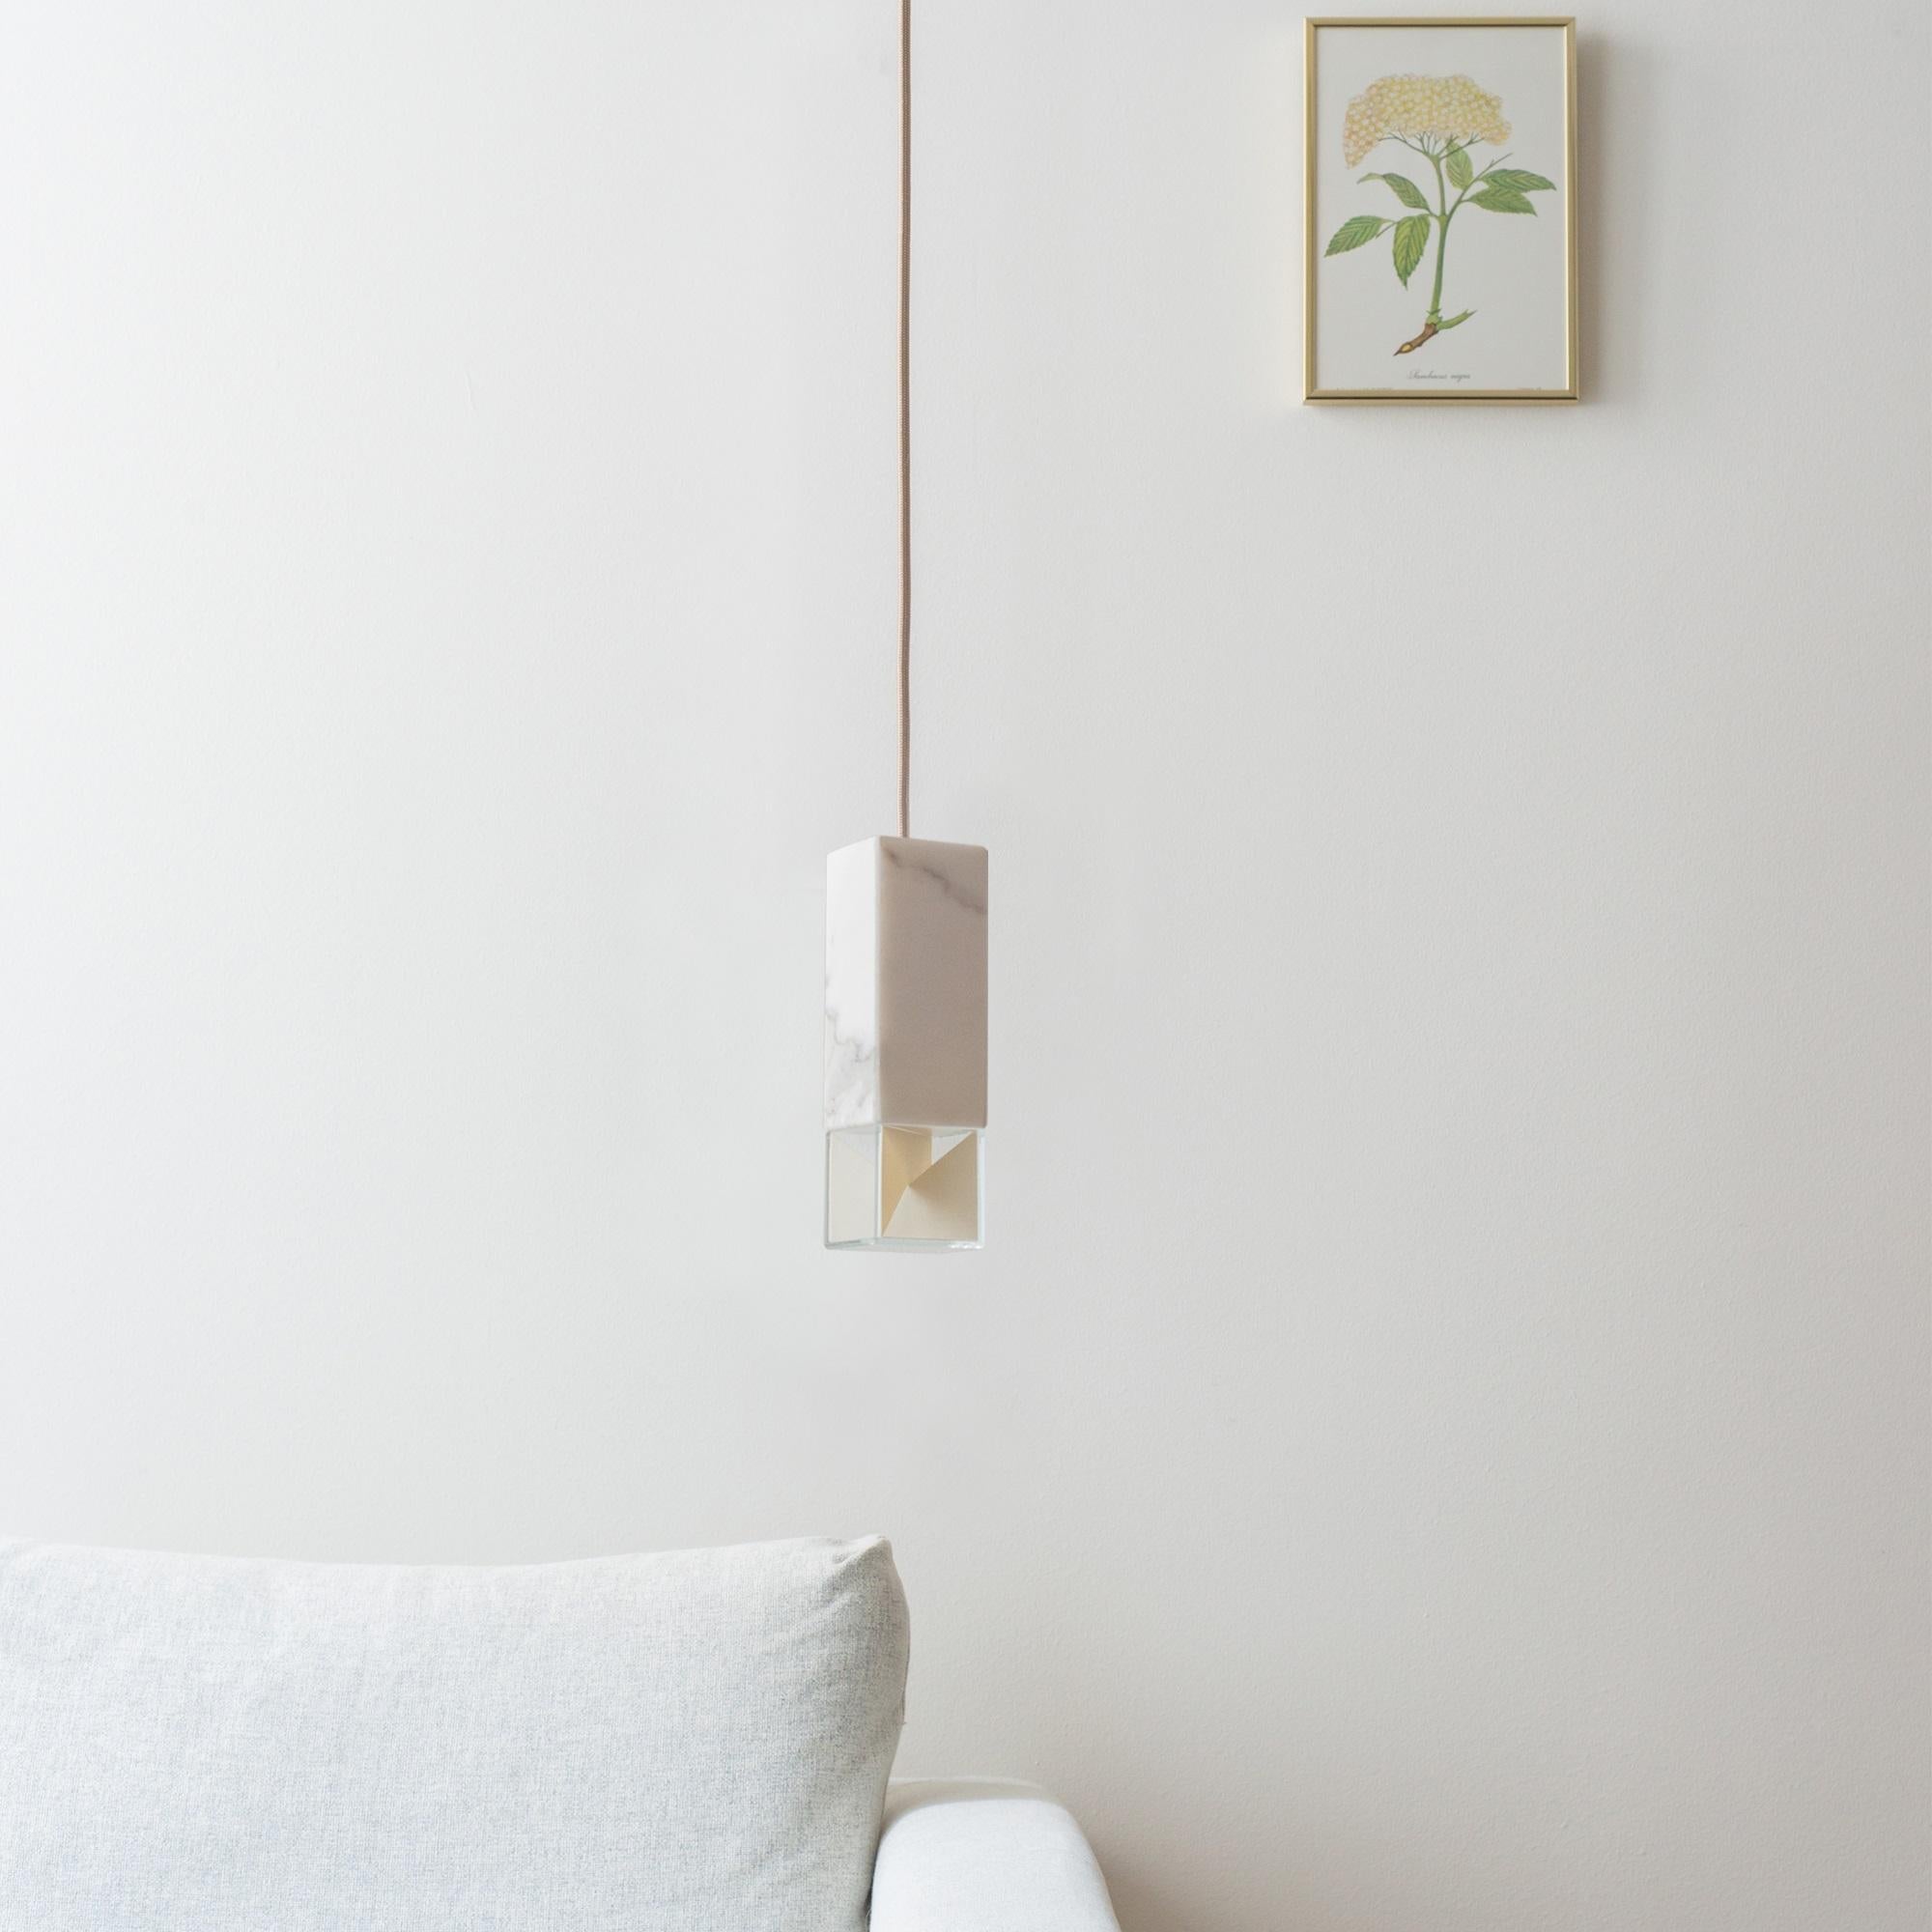 Elegant and Minimalist, this pendant lamp boasts a timeless design that will look stunning alone or with the others from the lamp/One Collection to create an eclectic display in any interior. Handcrafted of white Calacatta marble, the rectangular